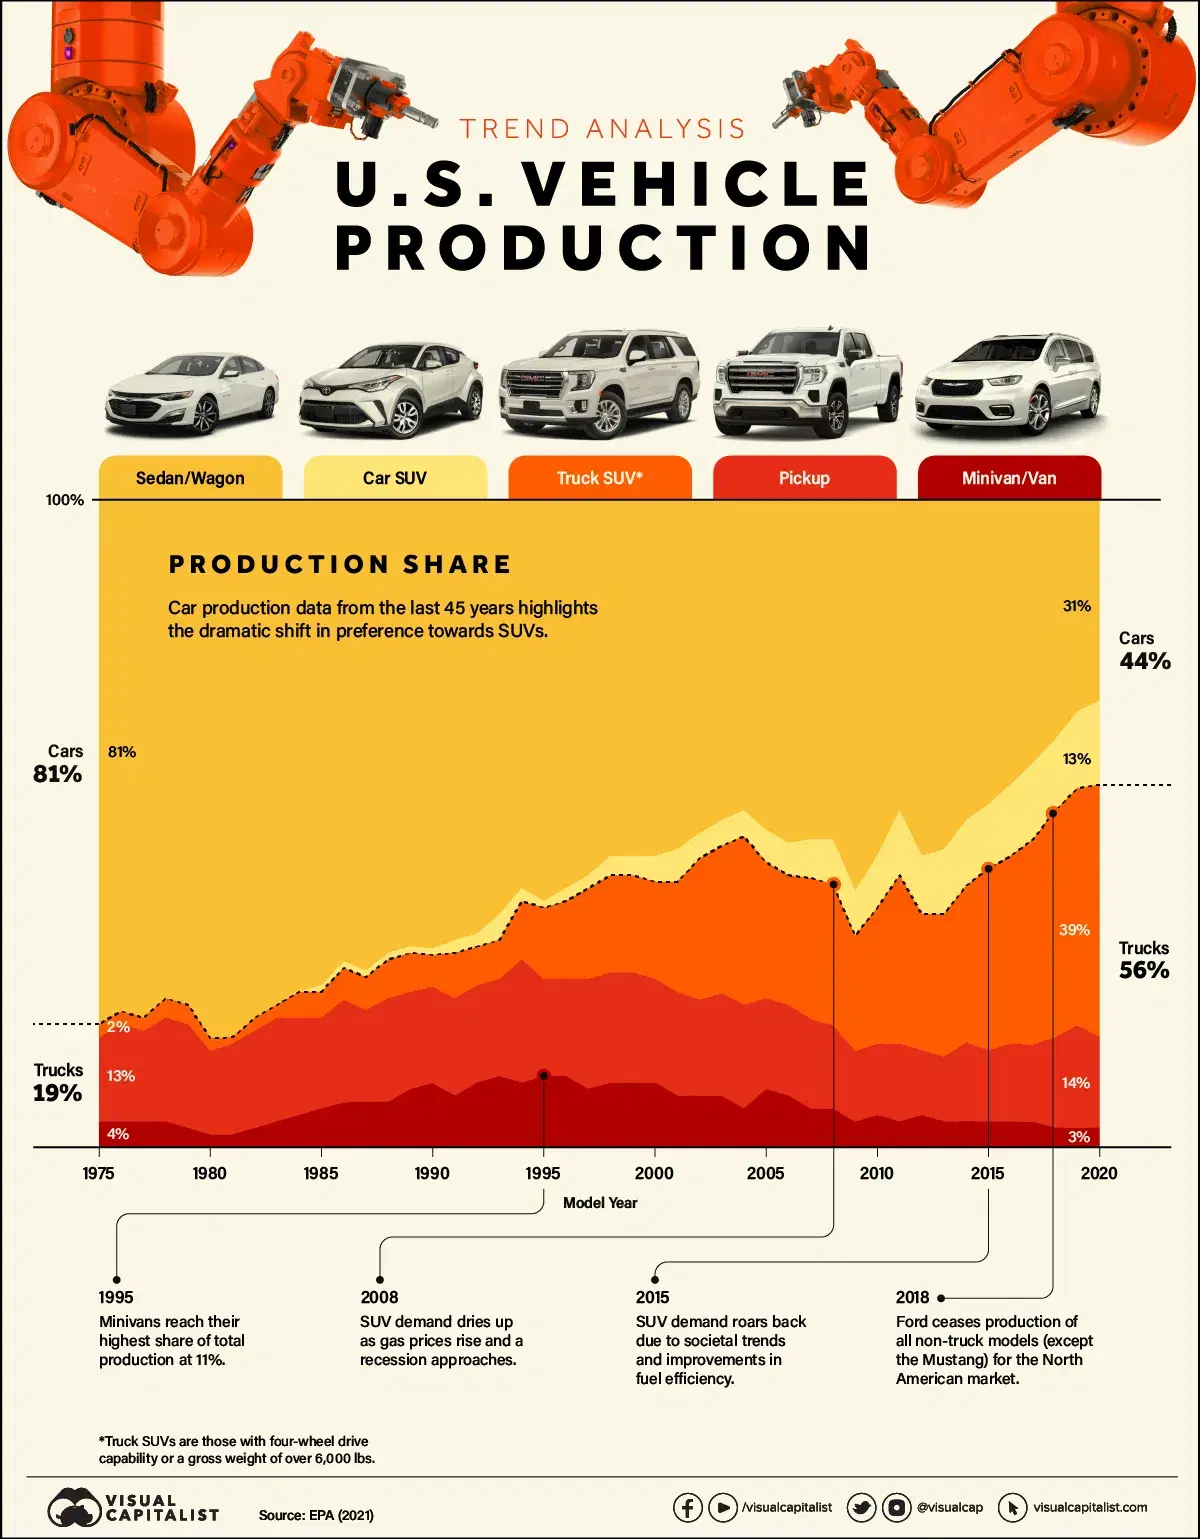 How U.S. Vehicle Production Has Shifted Over 45 Years